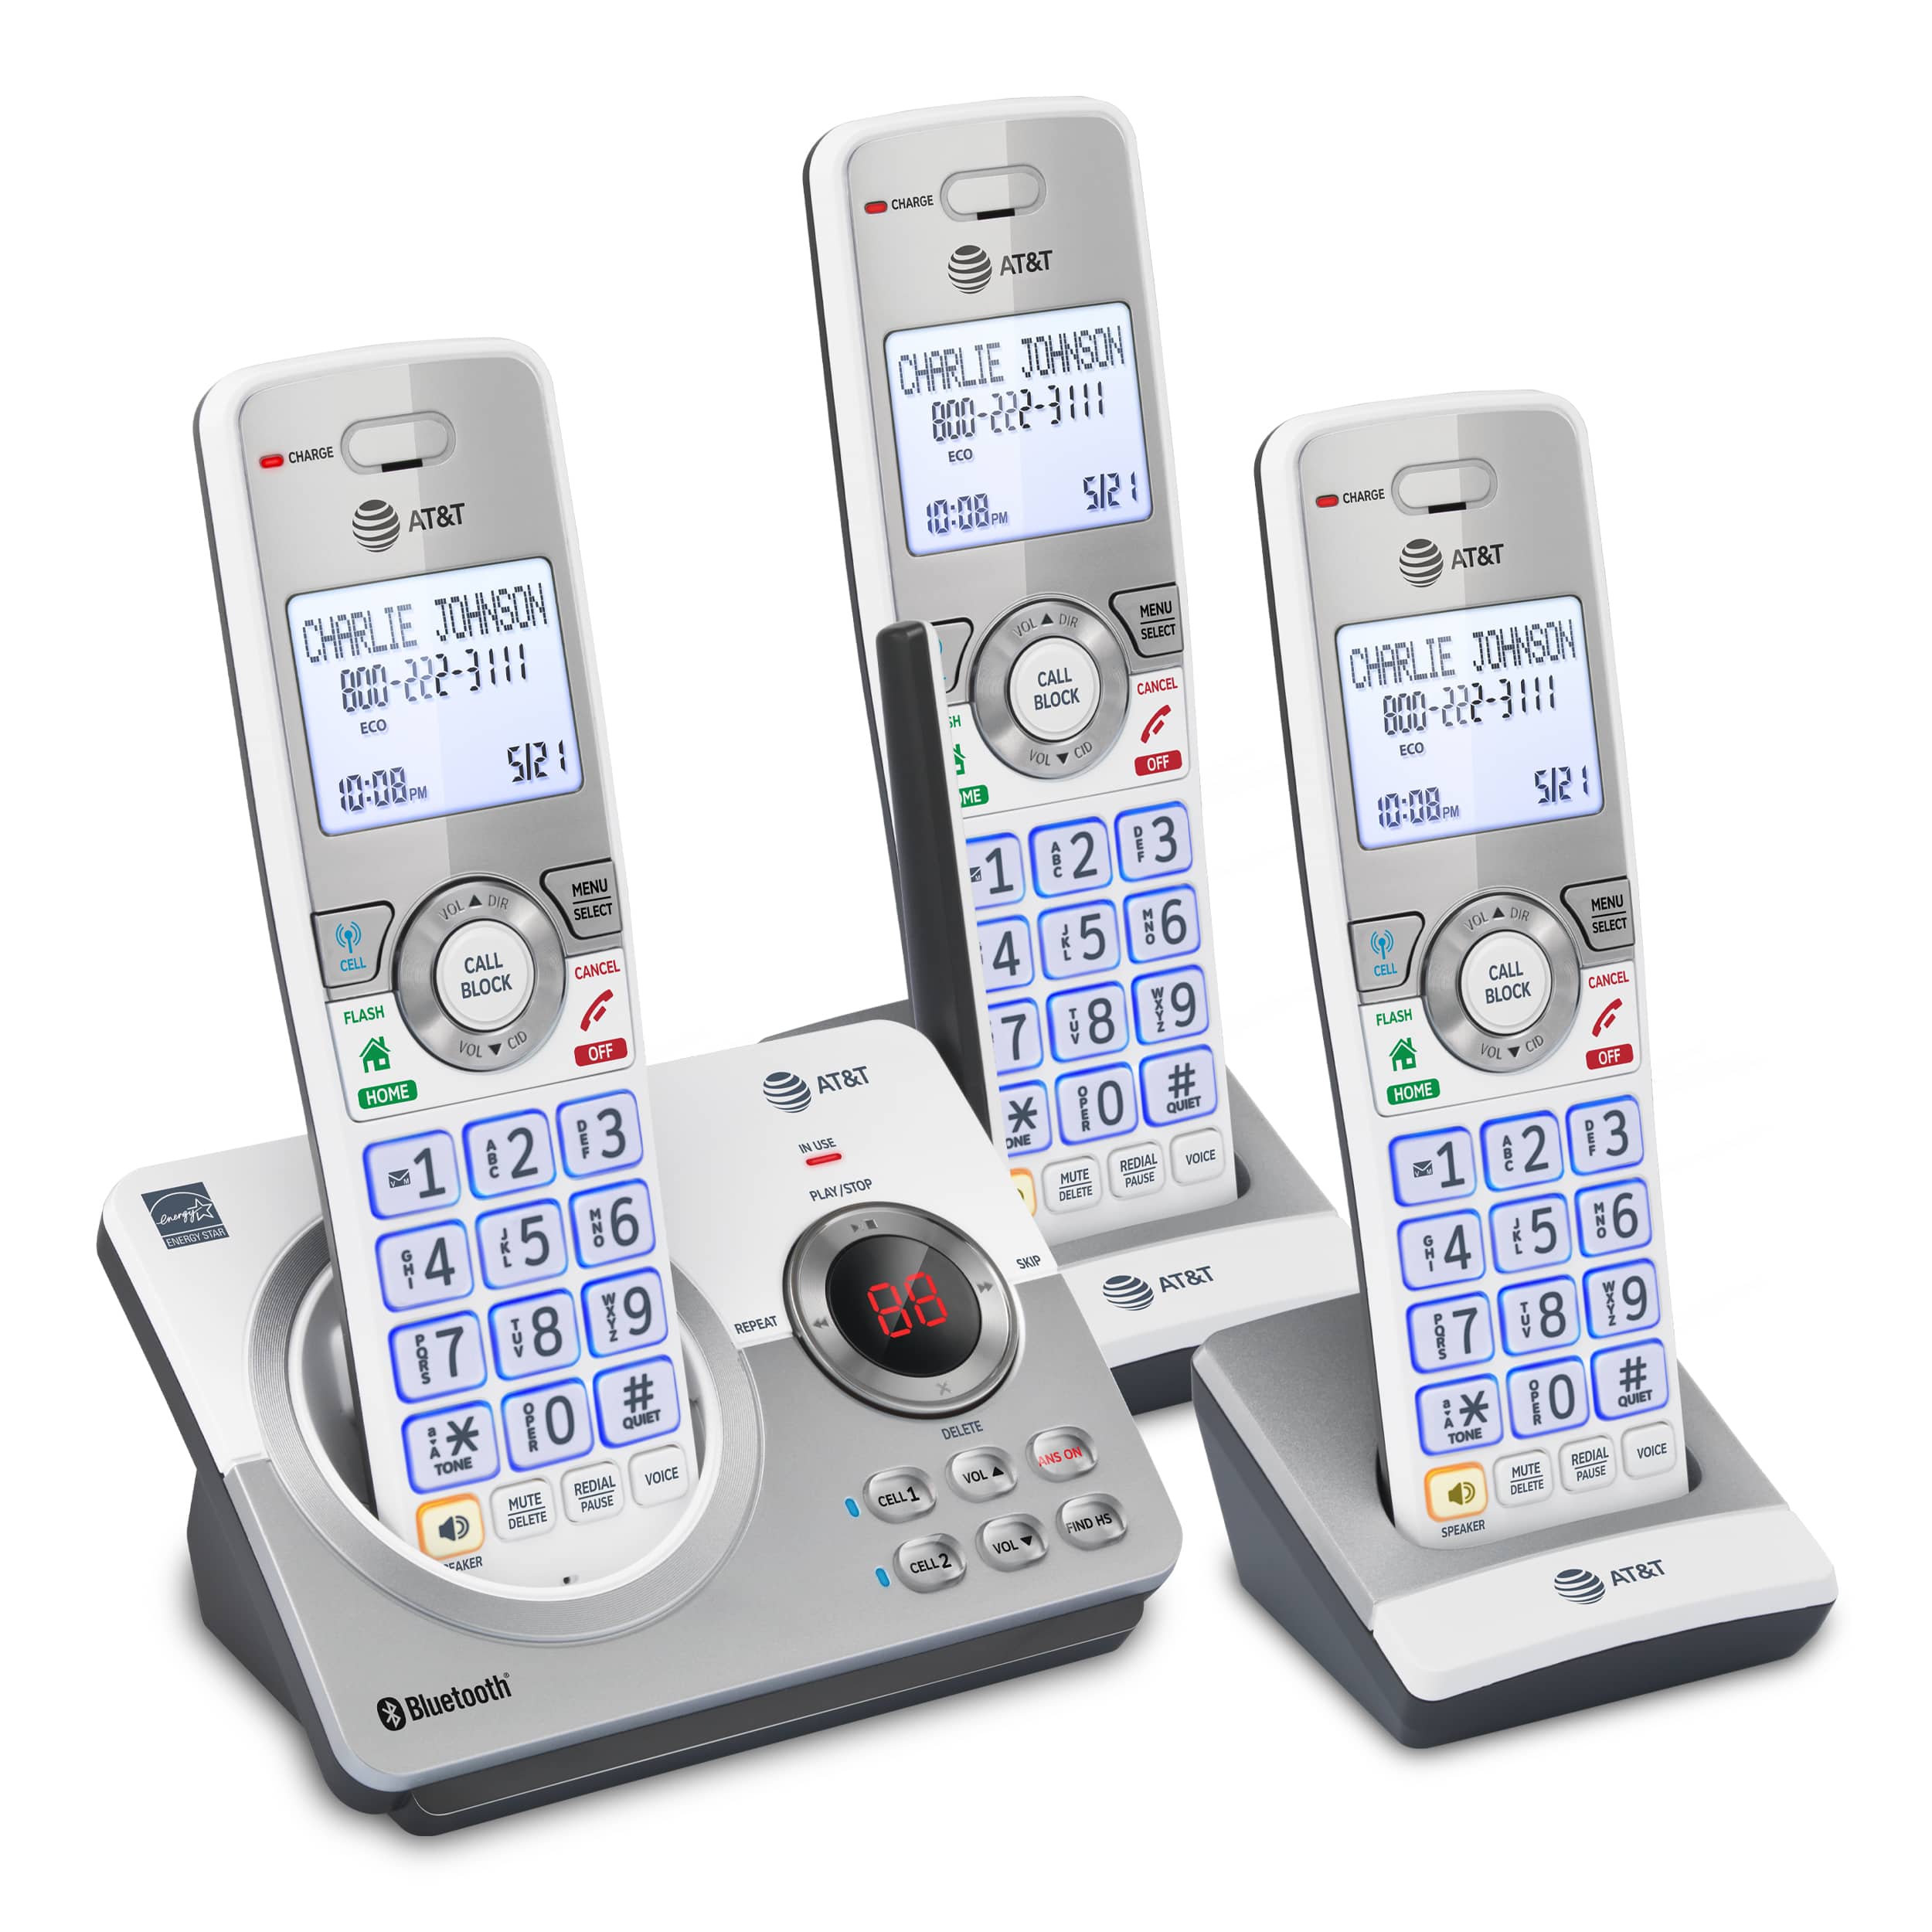 3-Handset Expandable Cordless Phone with Unsurpassed Range, Bluetooth Connect to Cell™, Smart Call Blocker and Answering System - view 3